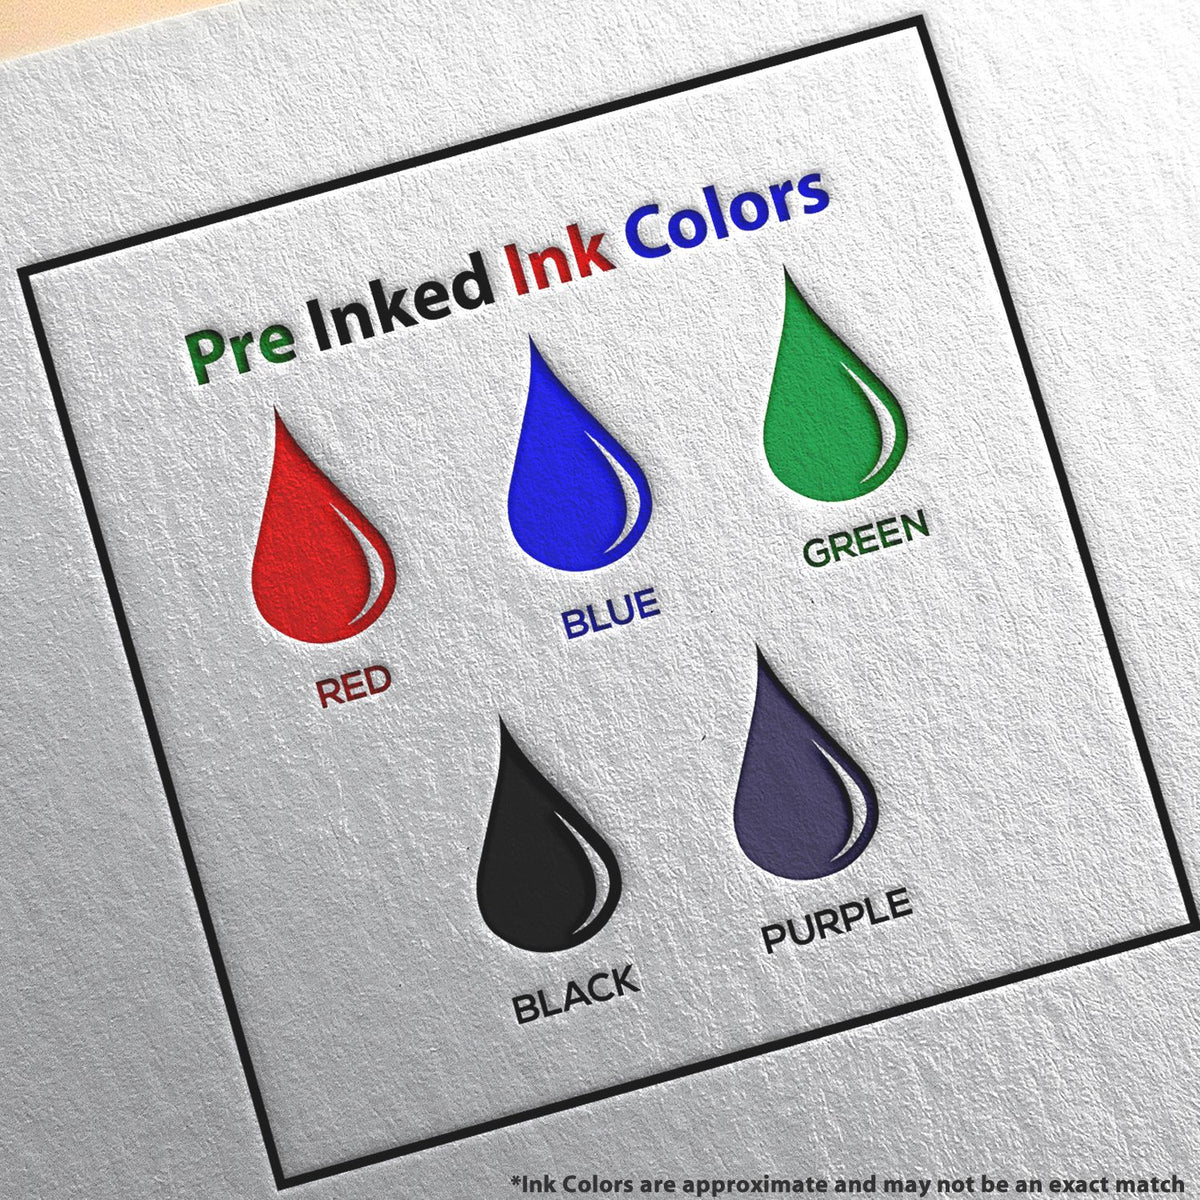 A picture showing the different ink colors or hues available for the Slim Pre-Inked Florida Professional Engineer Seal Stamp product.